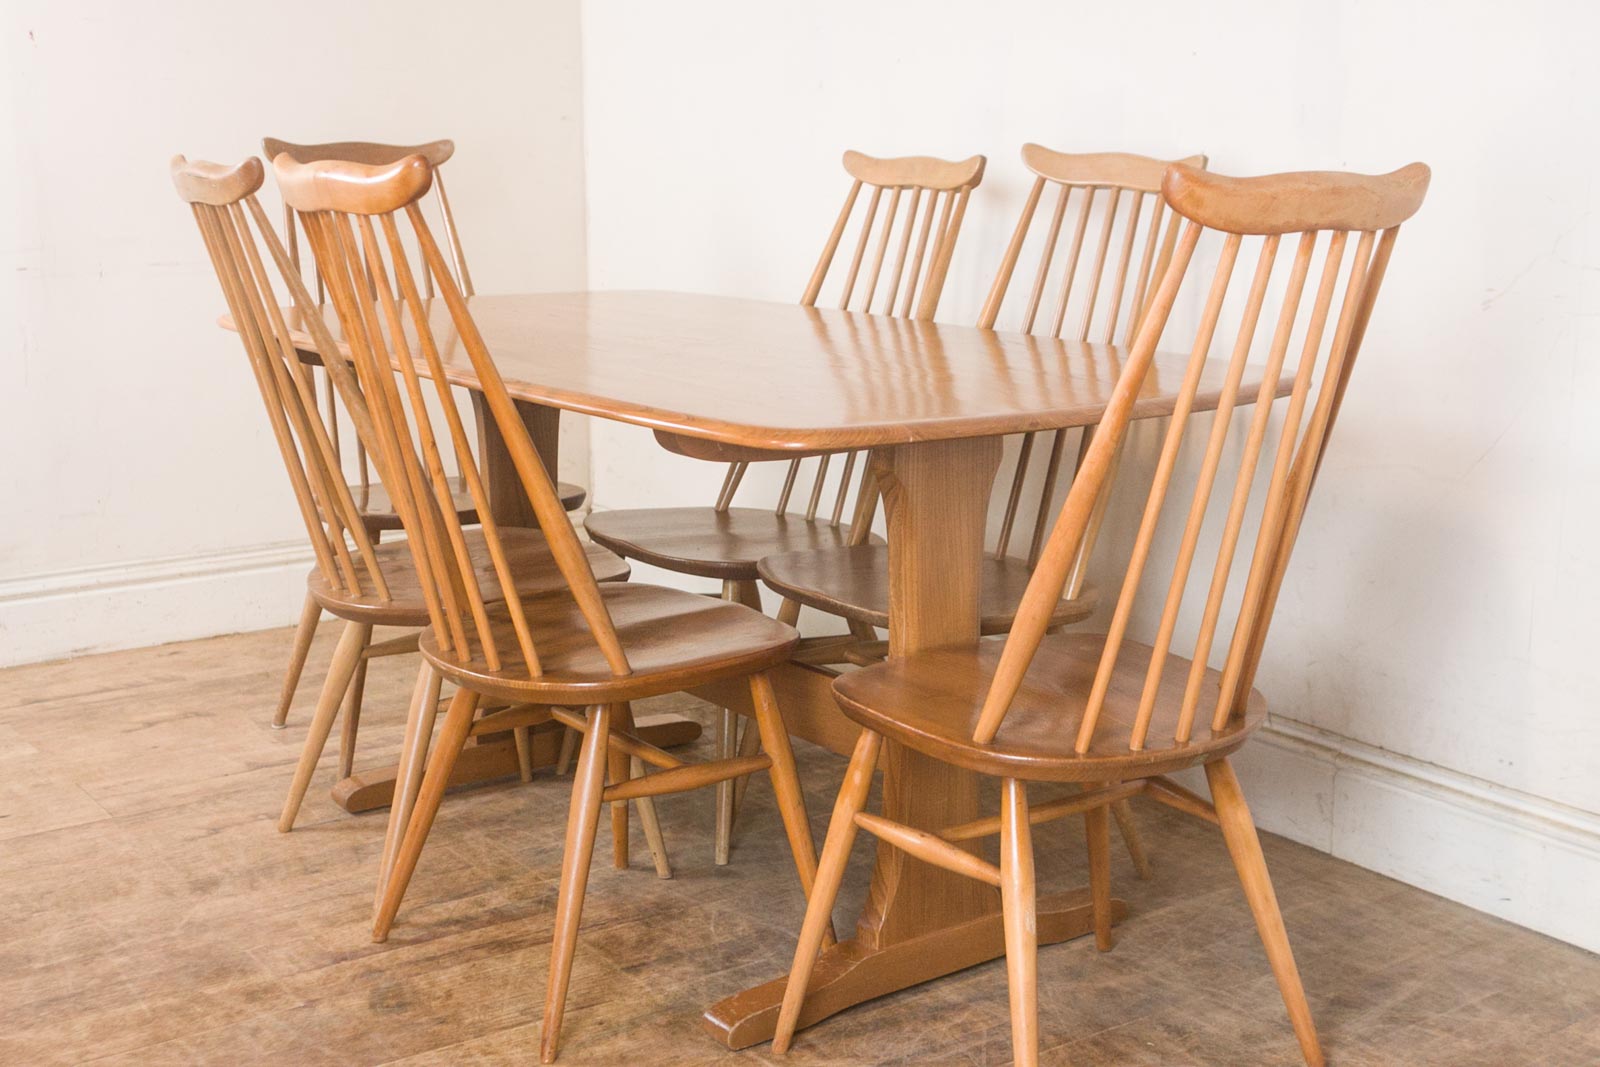 Ercol Dining Room Table And Chairs